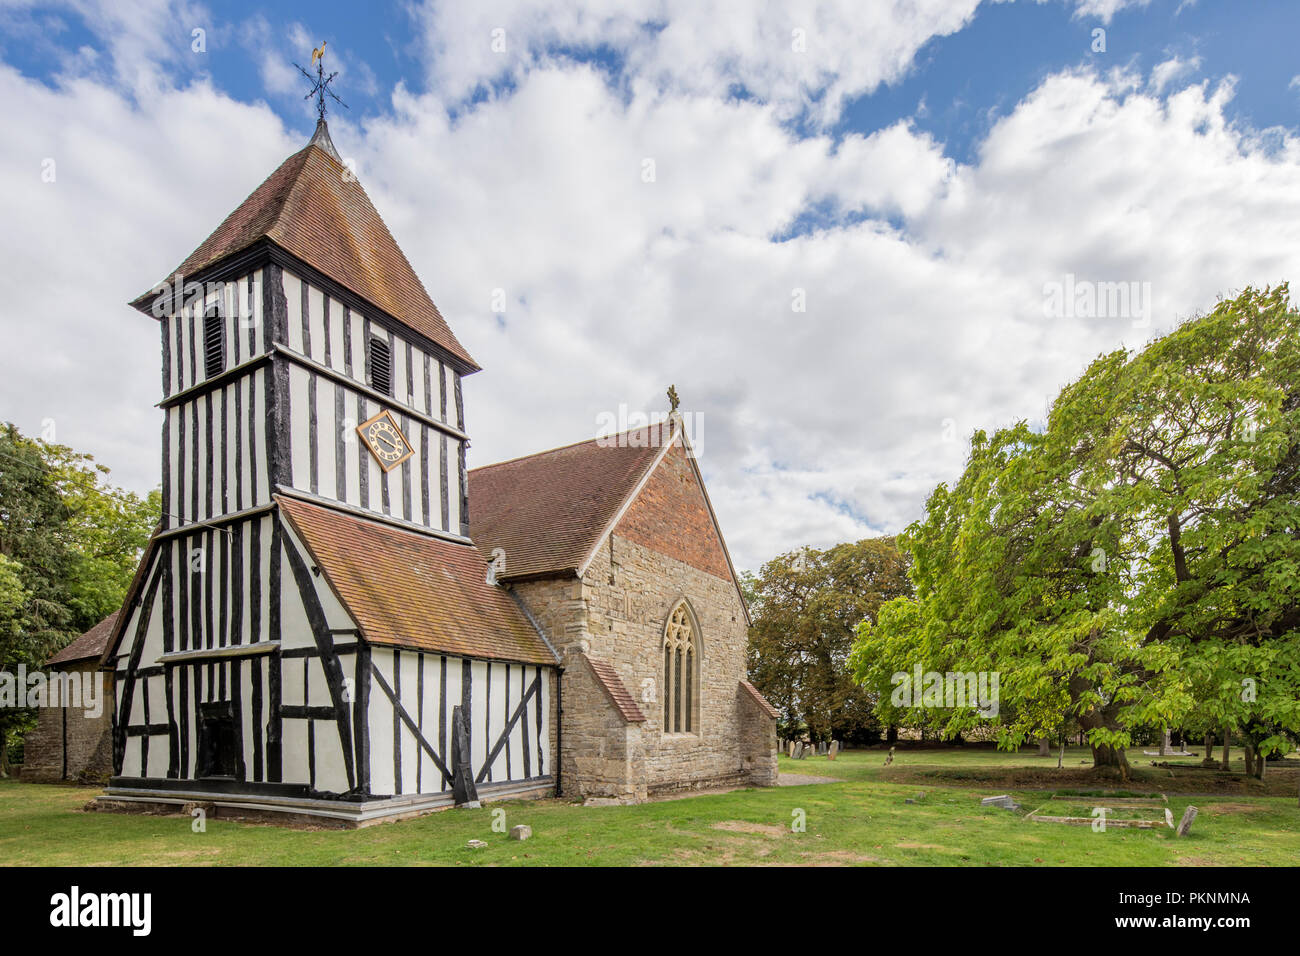 The timber-framed Church of St Peter at Pirton, Worcestershire, England, UK Stock Photo